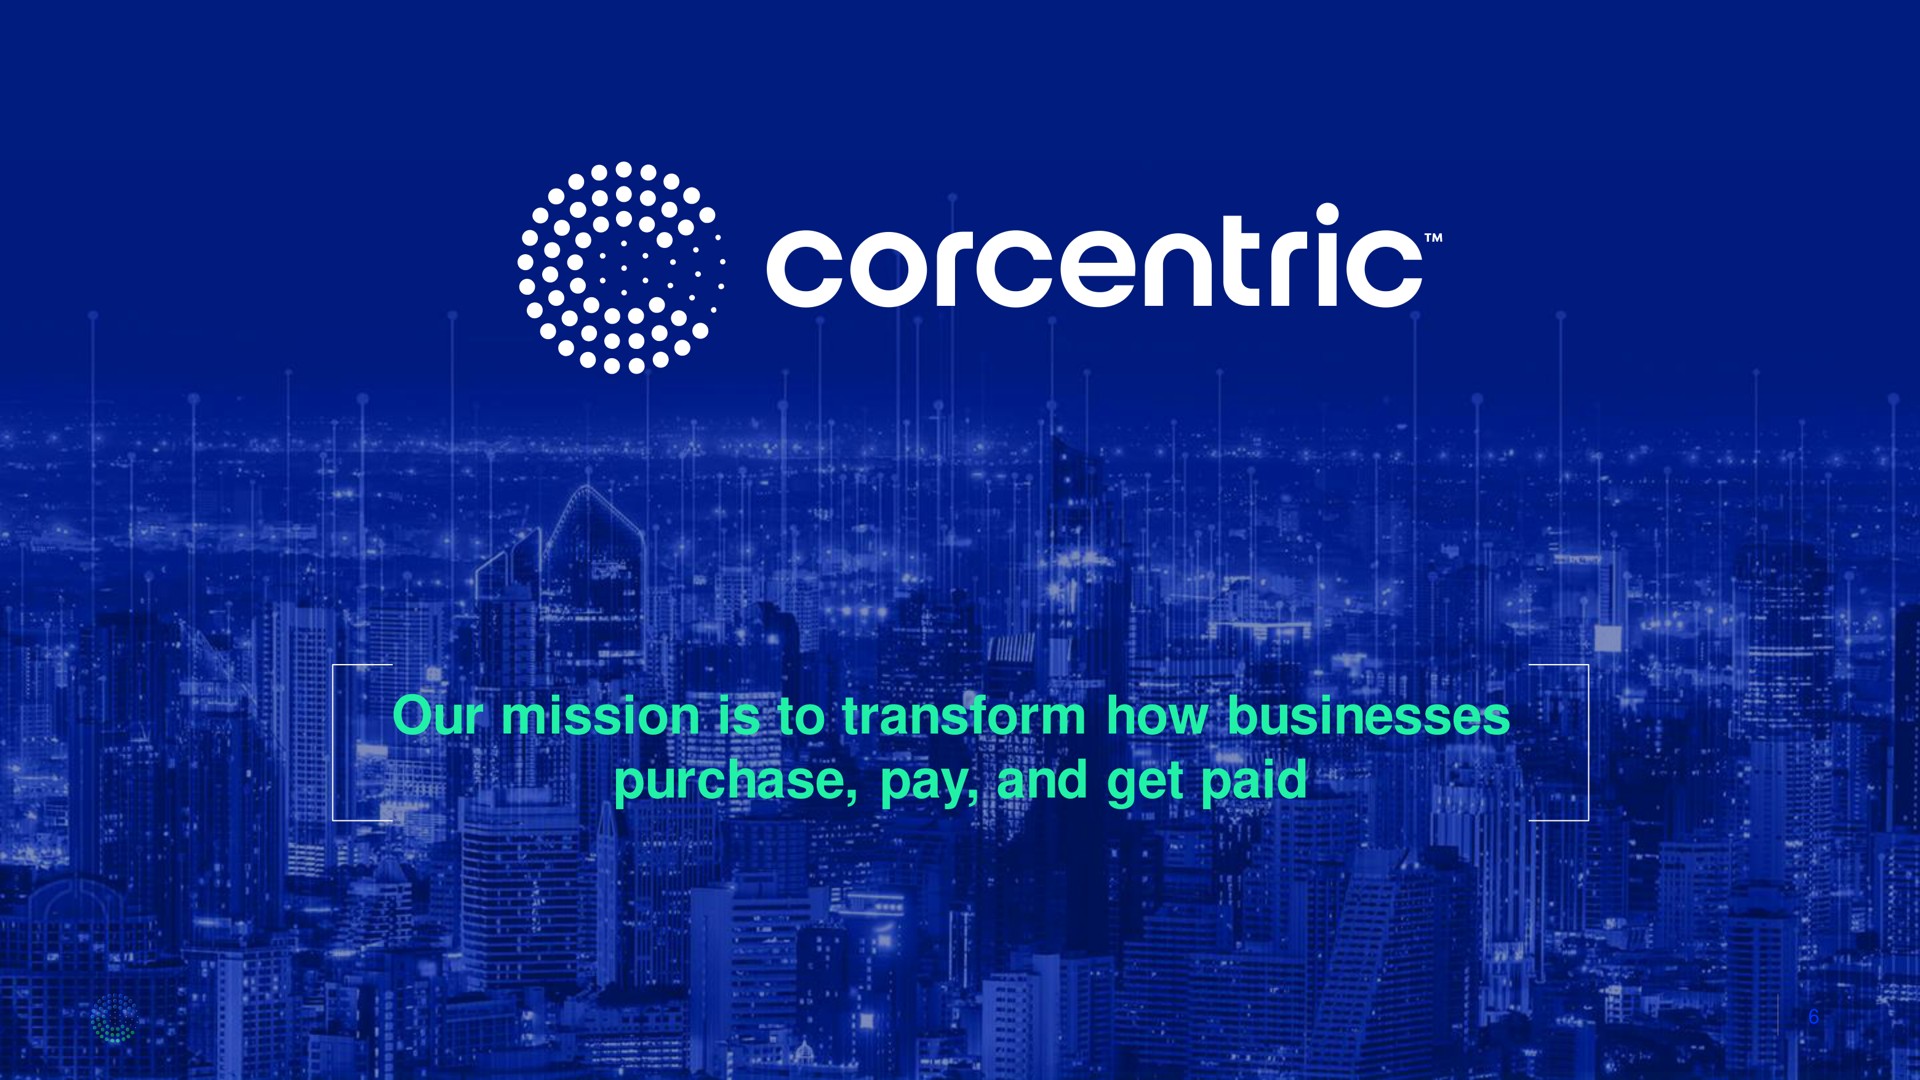 our mission is to transform how businesses purchase pay and get paid melt i rea ies he | Corecentric